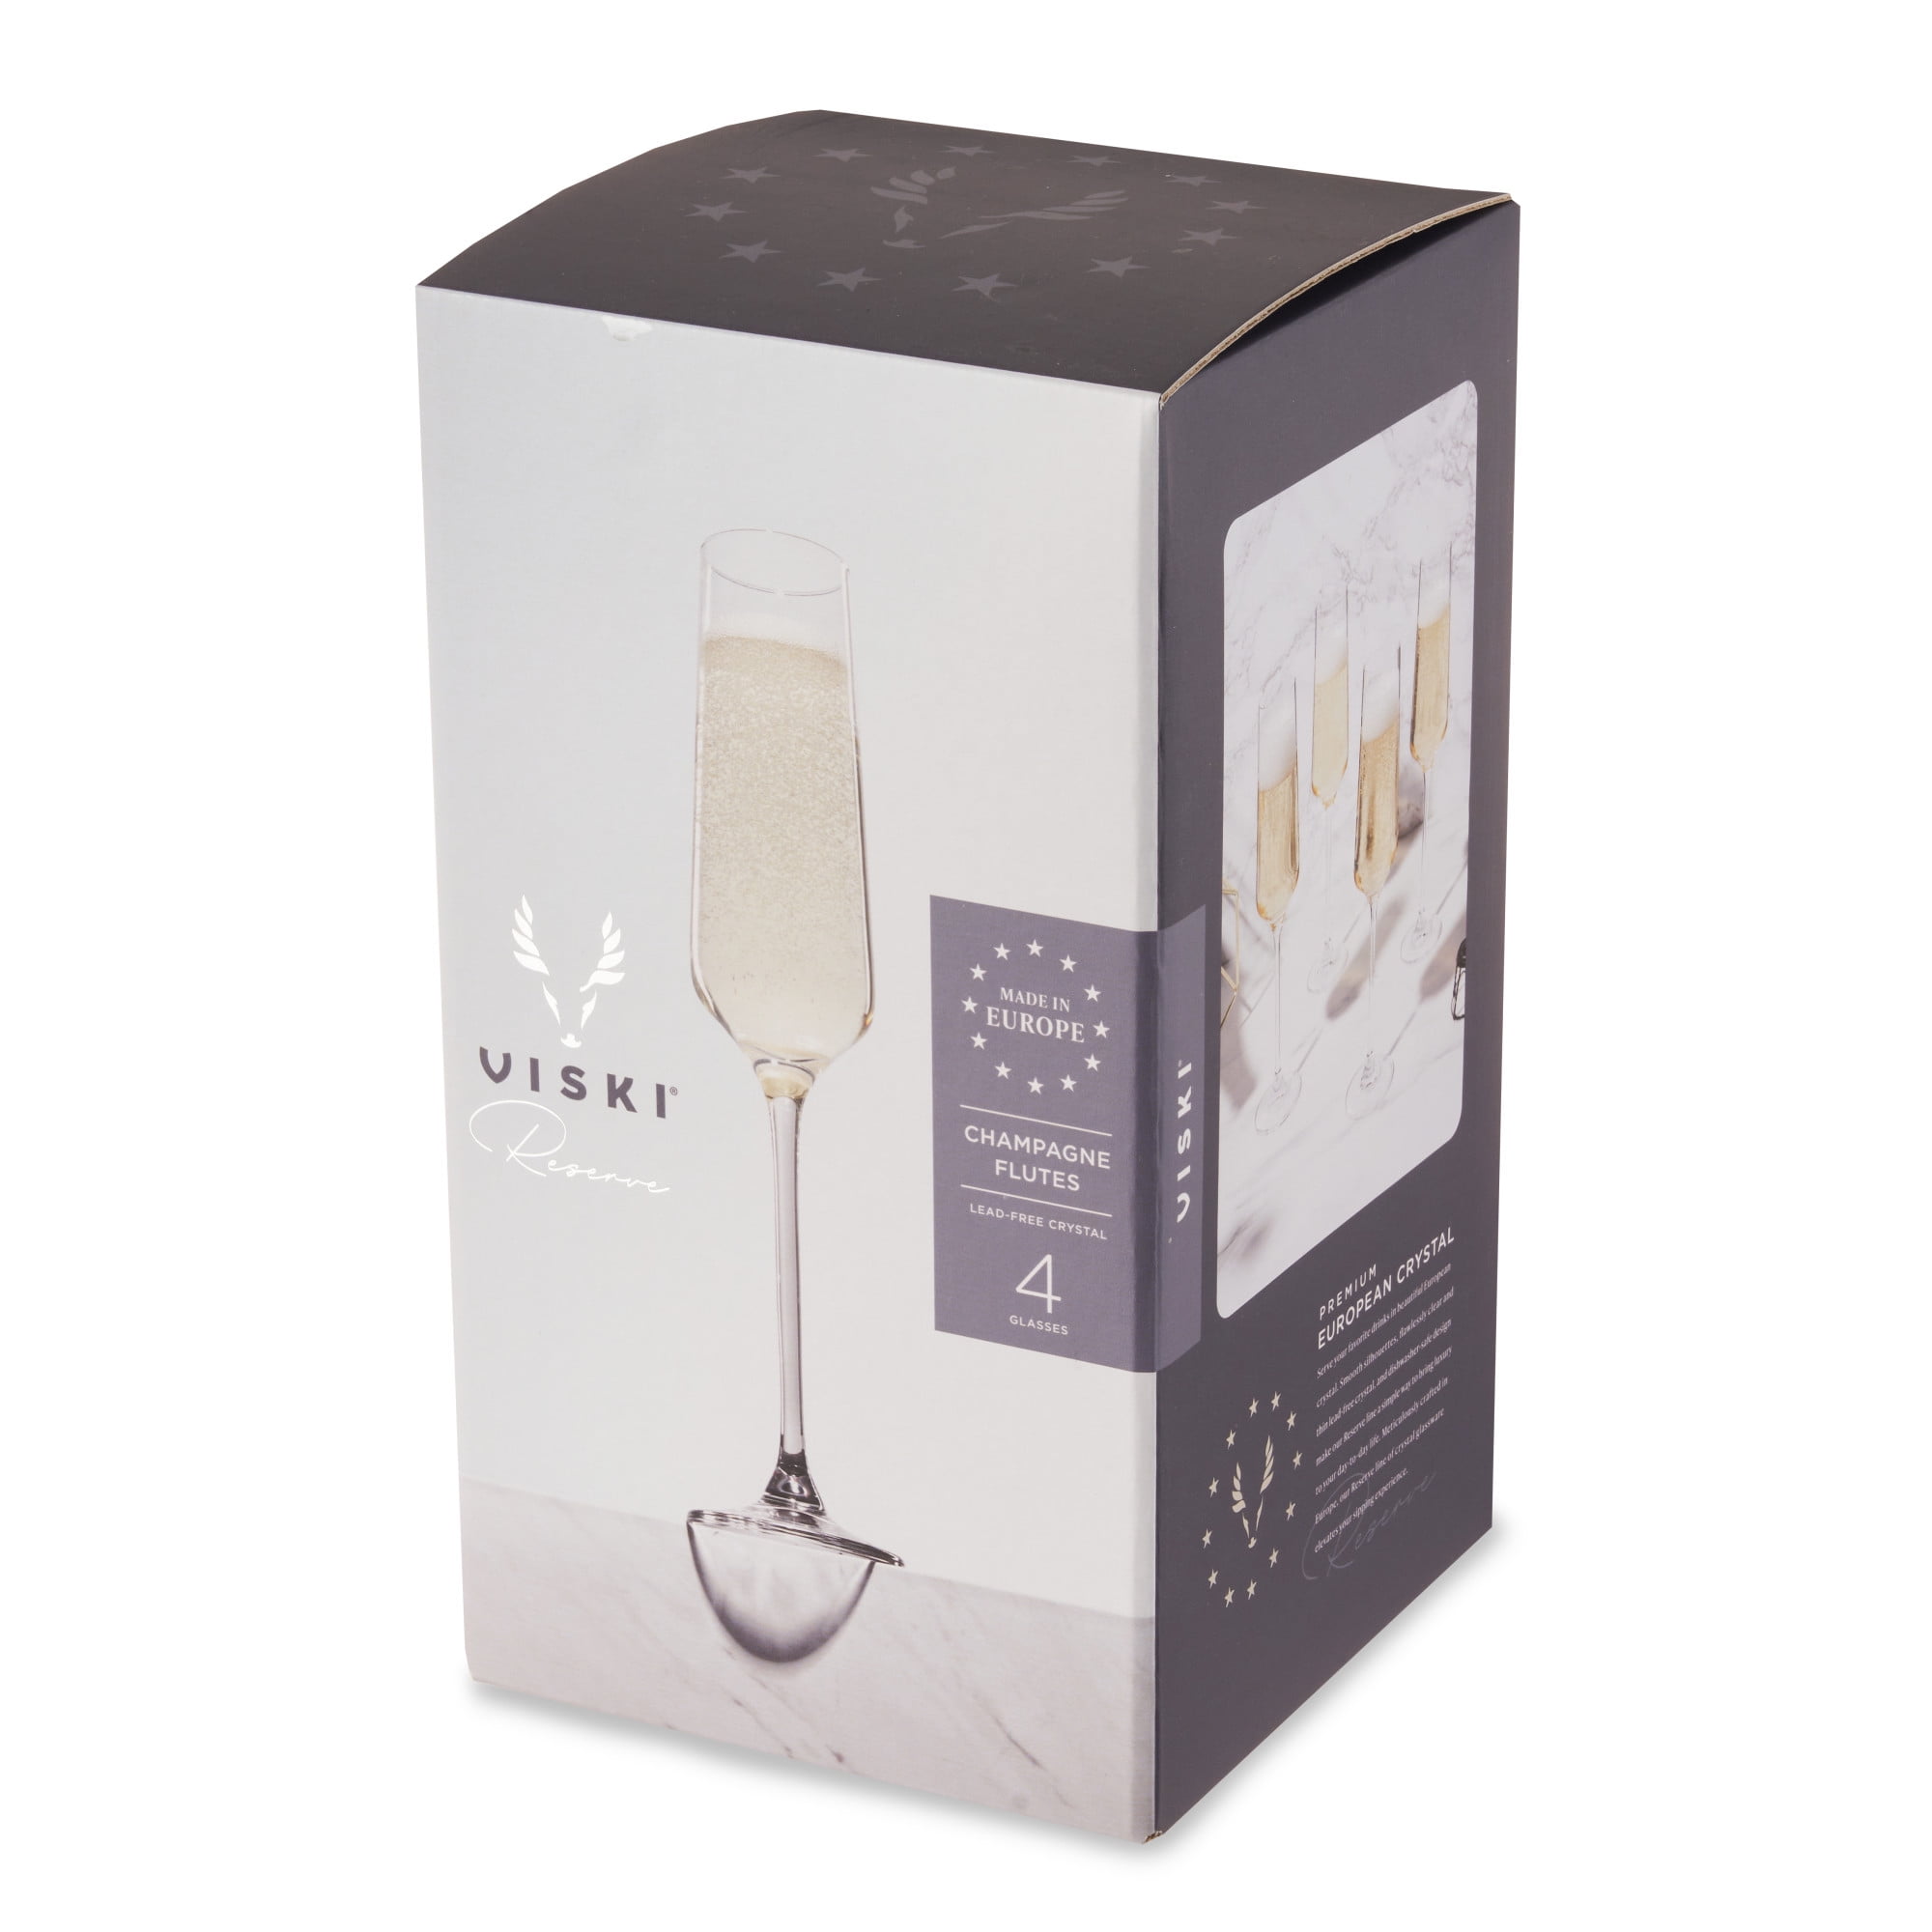 Crystal Champagne Flutes Wine Gift Set Square Wine Glasses With Stem  Cocktail-Glass Lead Free Pearly Champagne Glasses